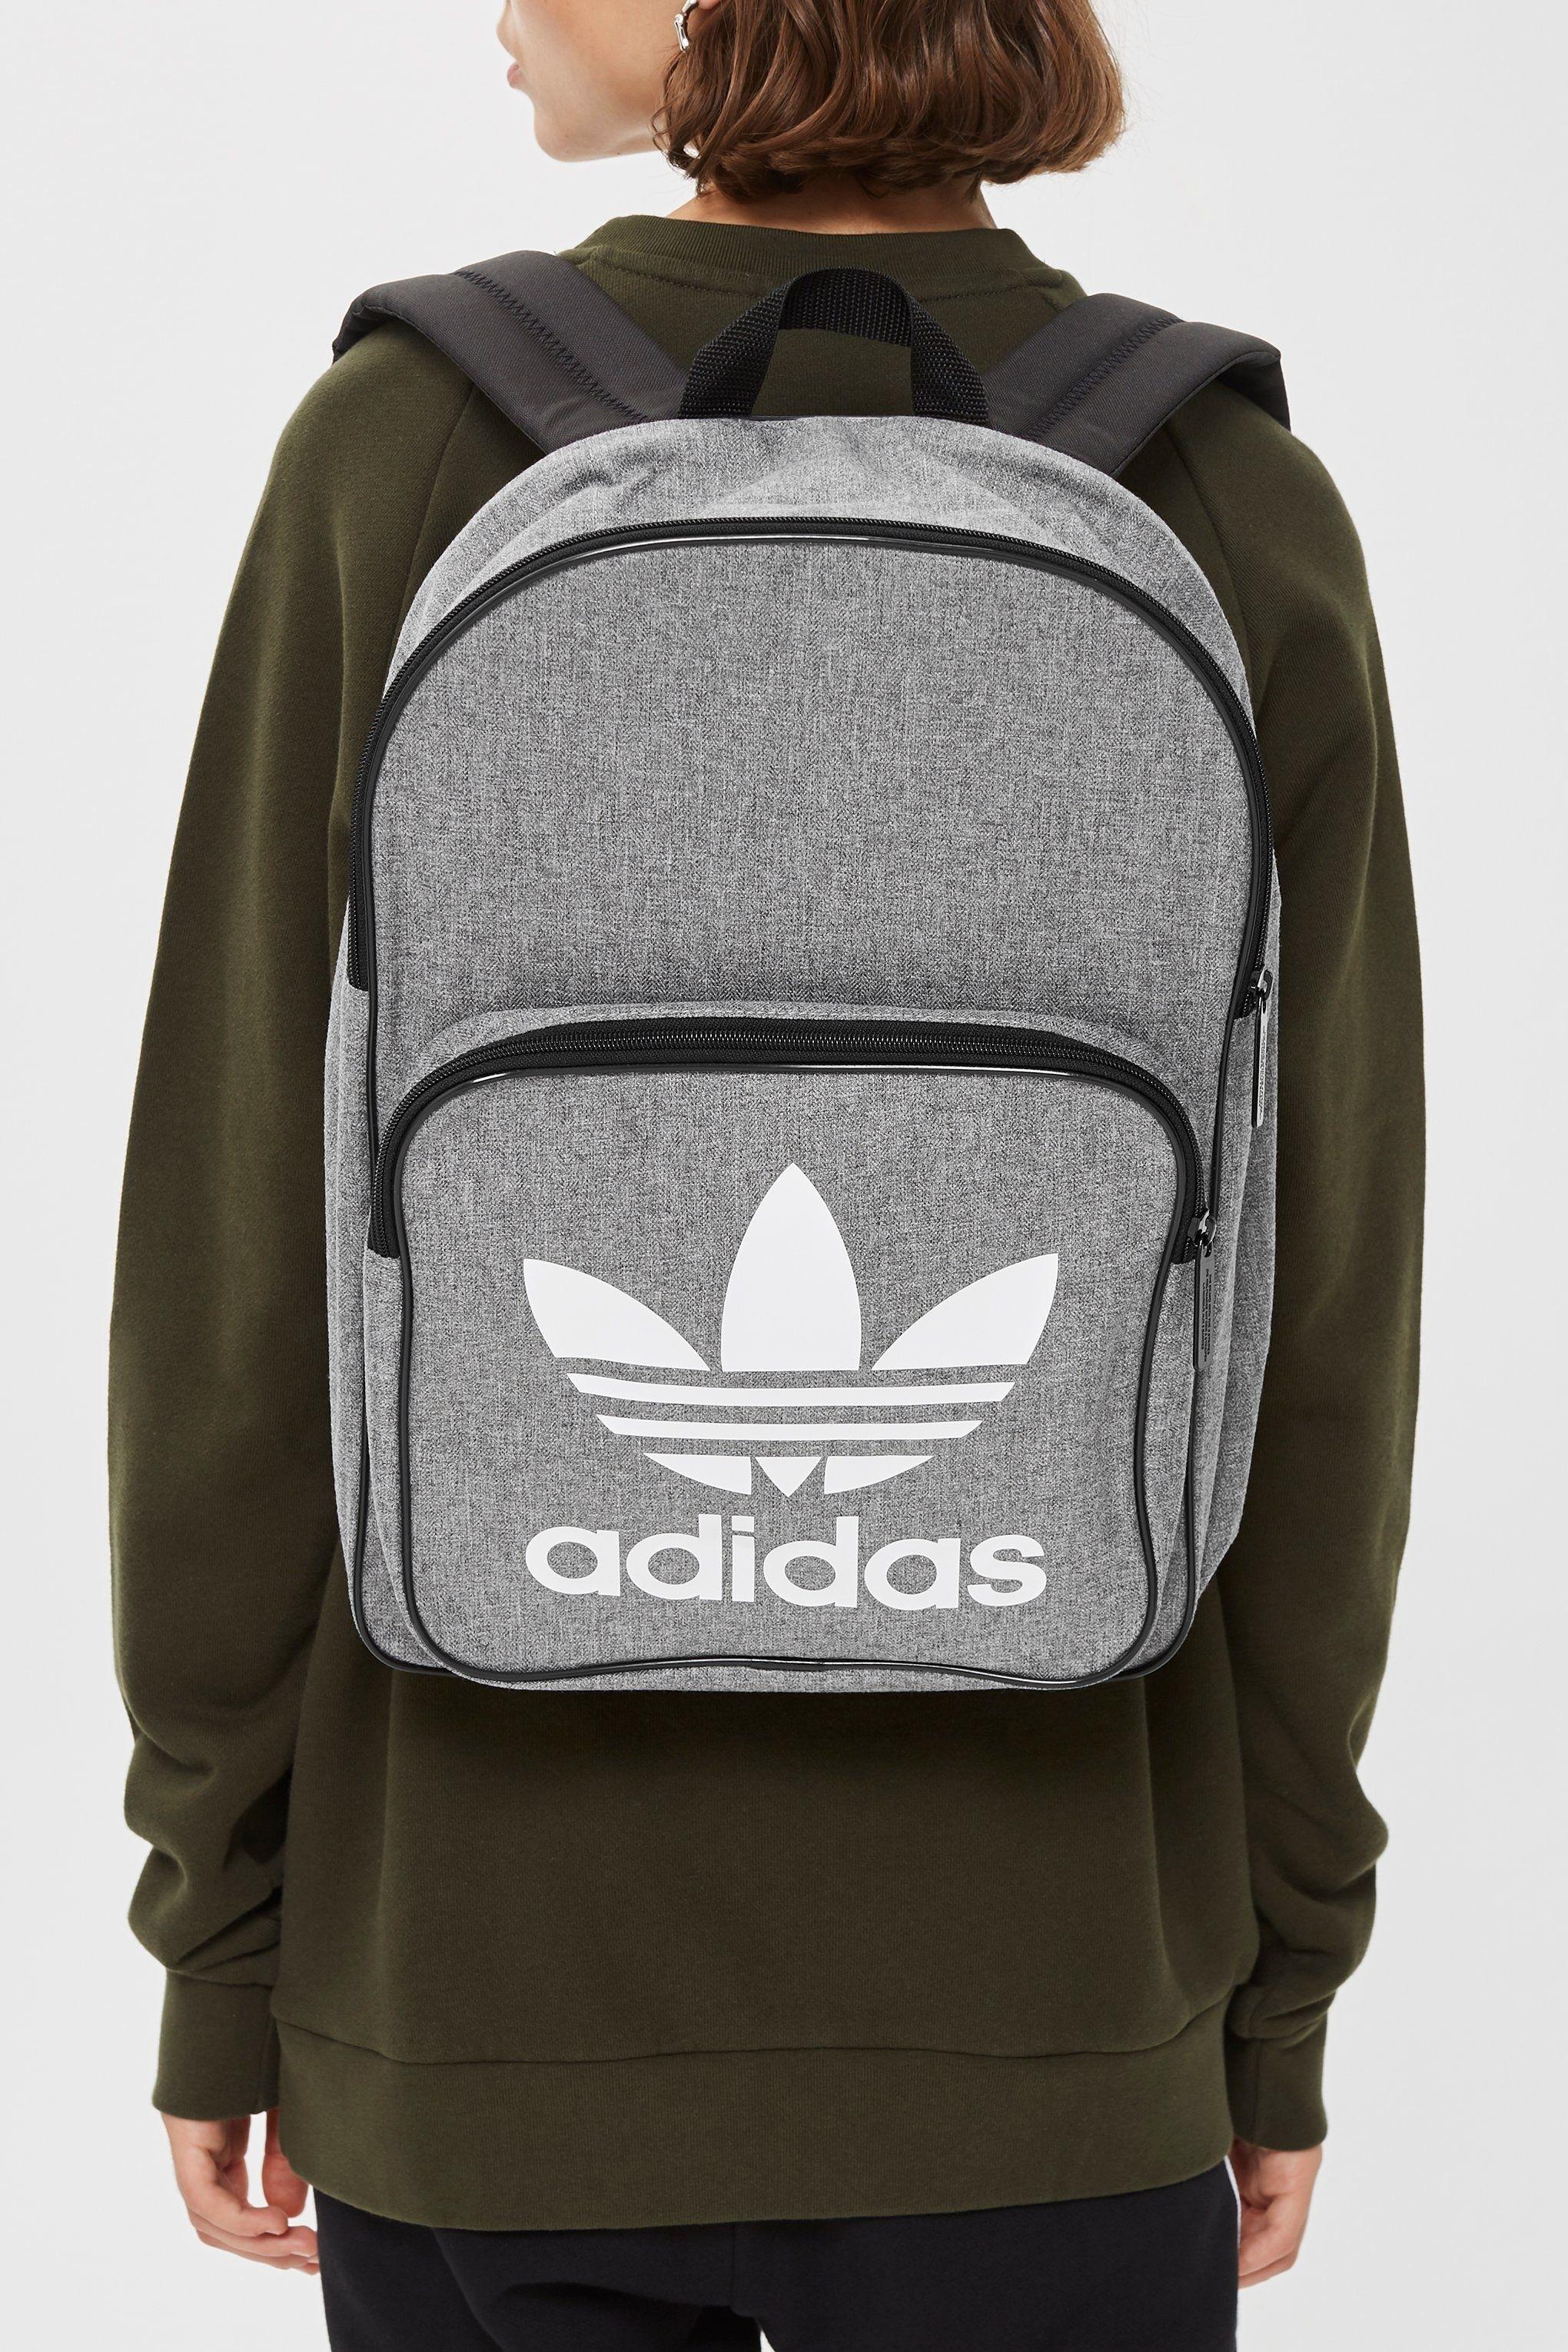 Adidas Accessories Logo - Logo Backpack by adidas - Bags & Accessories- Topshop